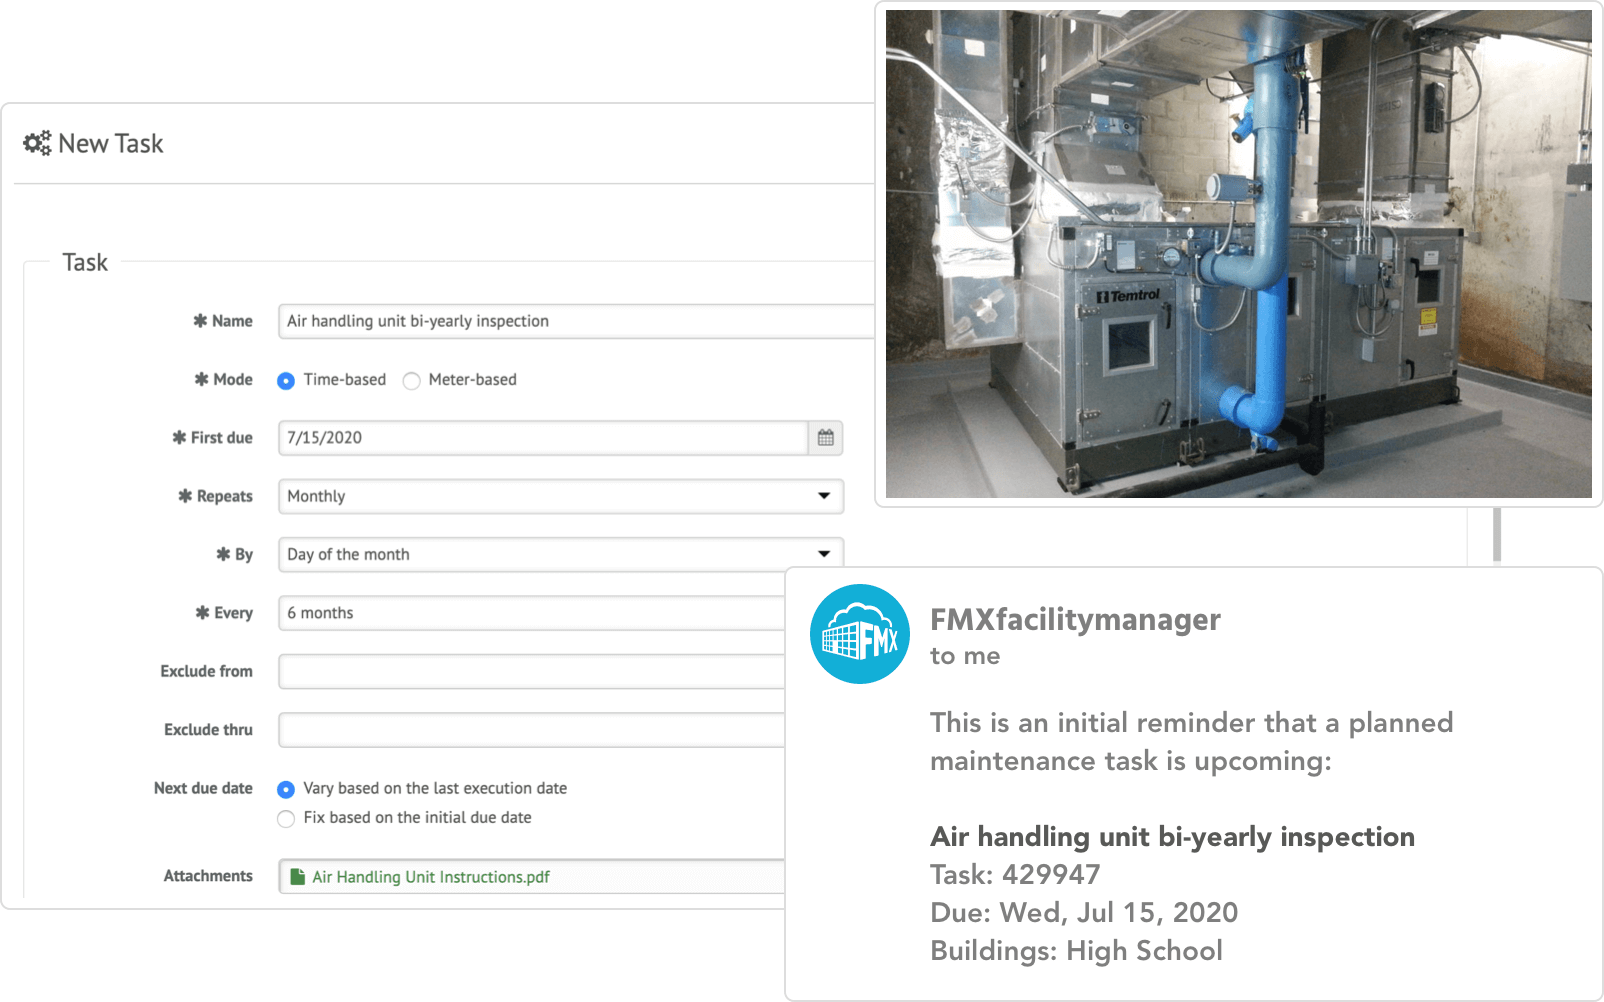 maintenance scheduling: email reminder from FMXfacilitymanager to perform planned maintenance on an air handling unit